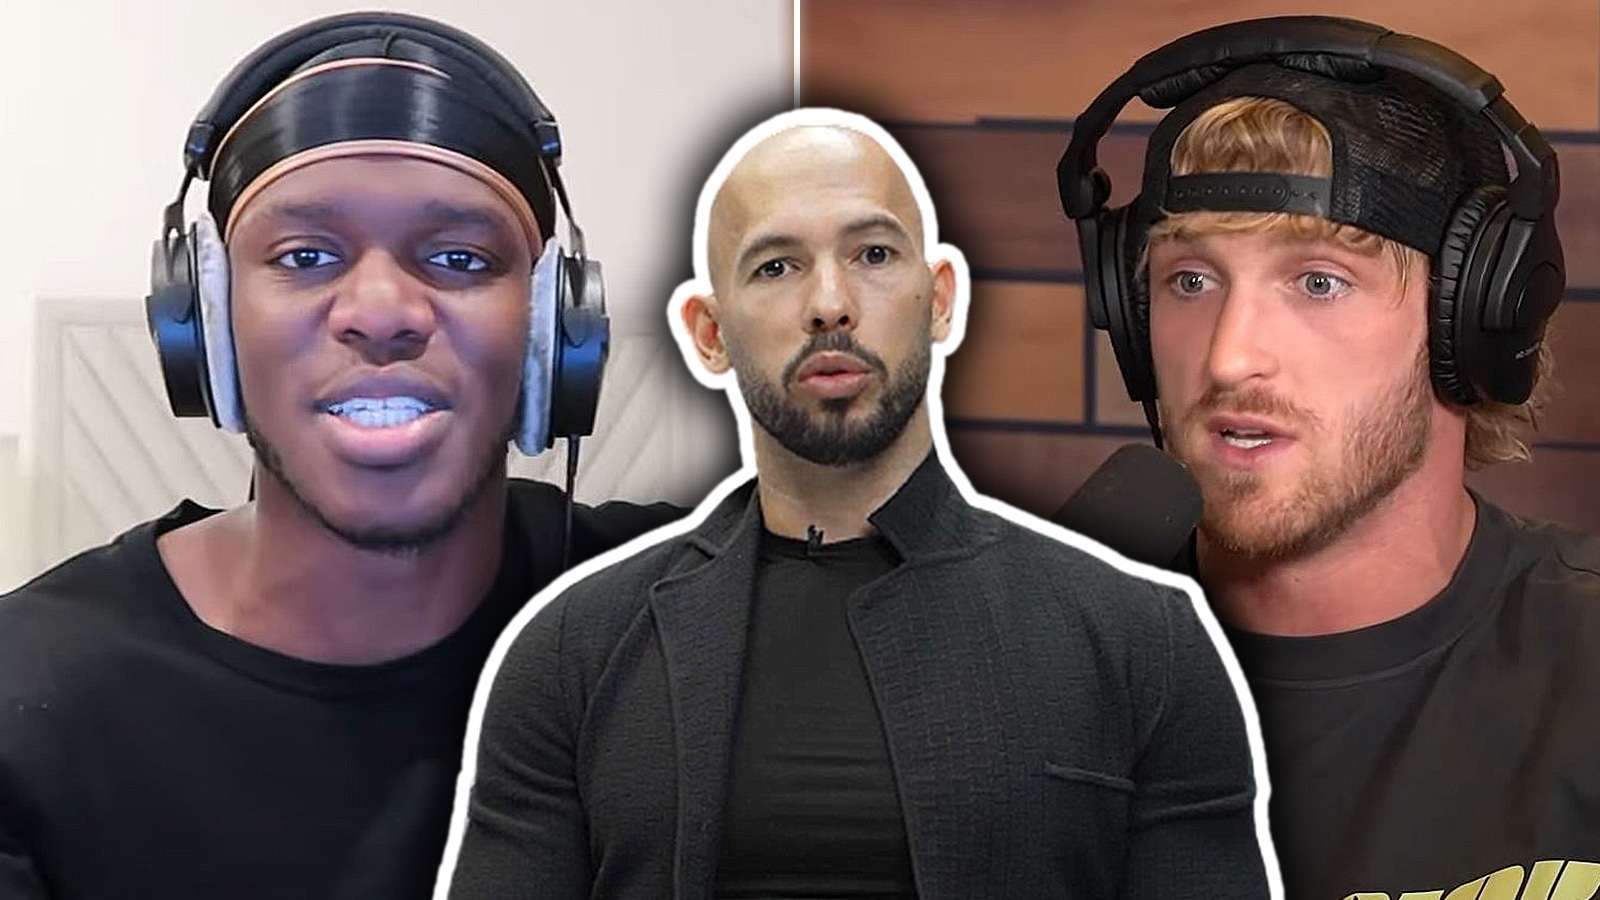 KSI dismisses logan paul's concerns about andrew tate fight